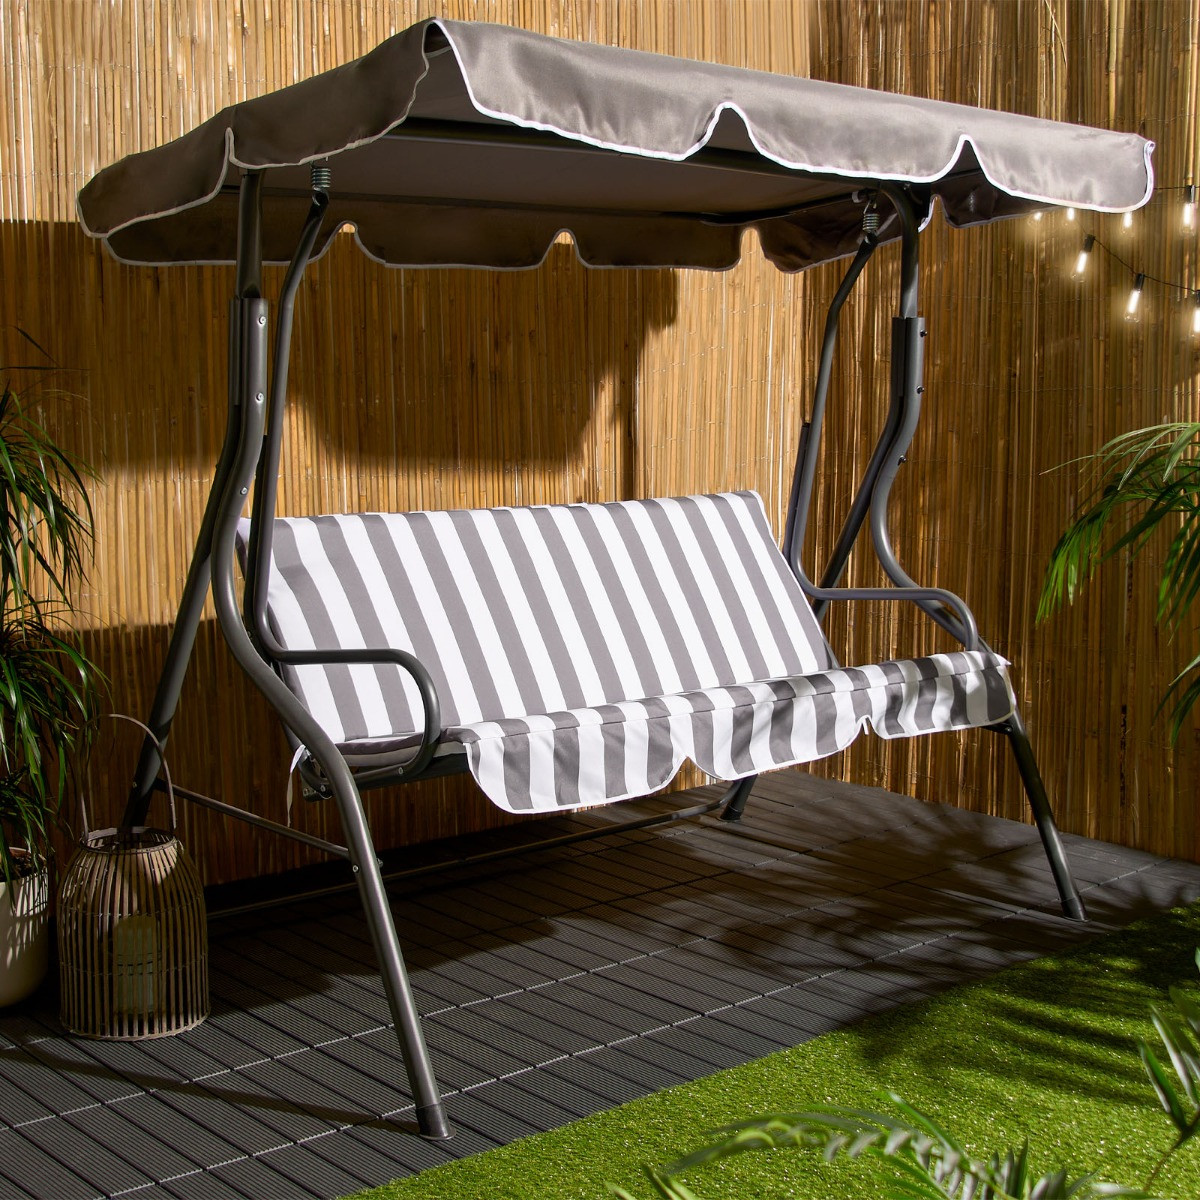 OHS 3 Seater Swing Bench With Canopy - Grey / White Stripe>